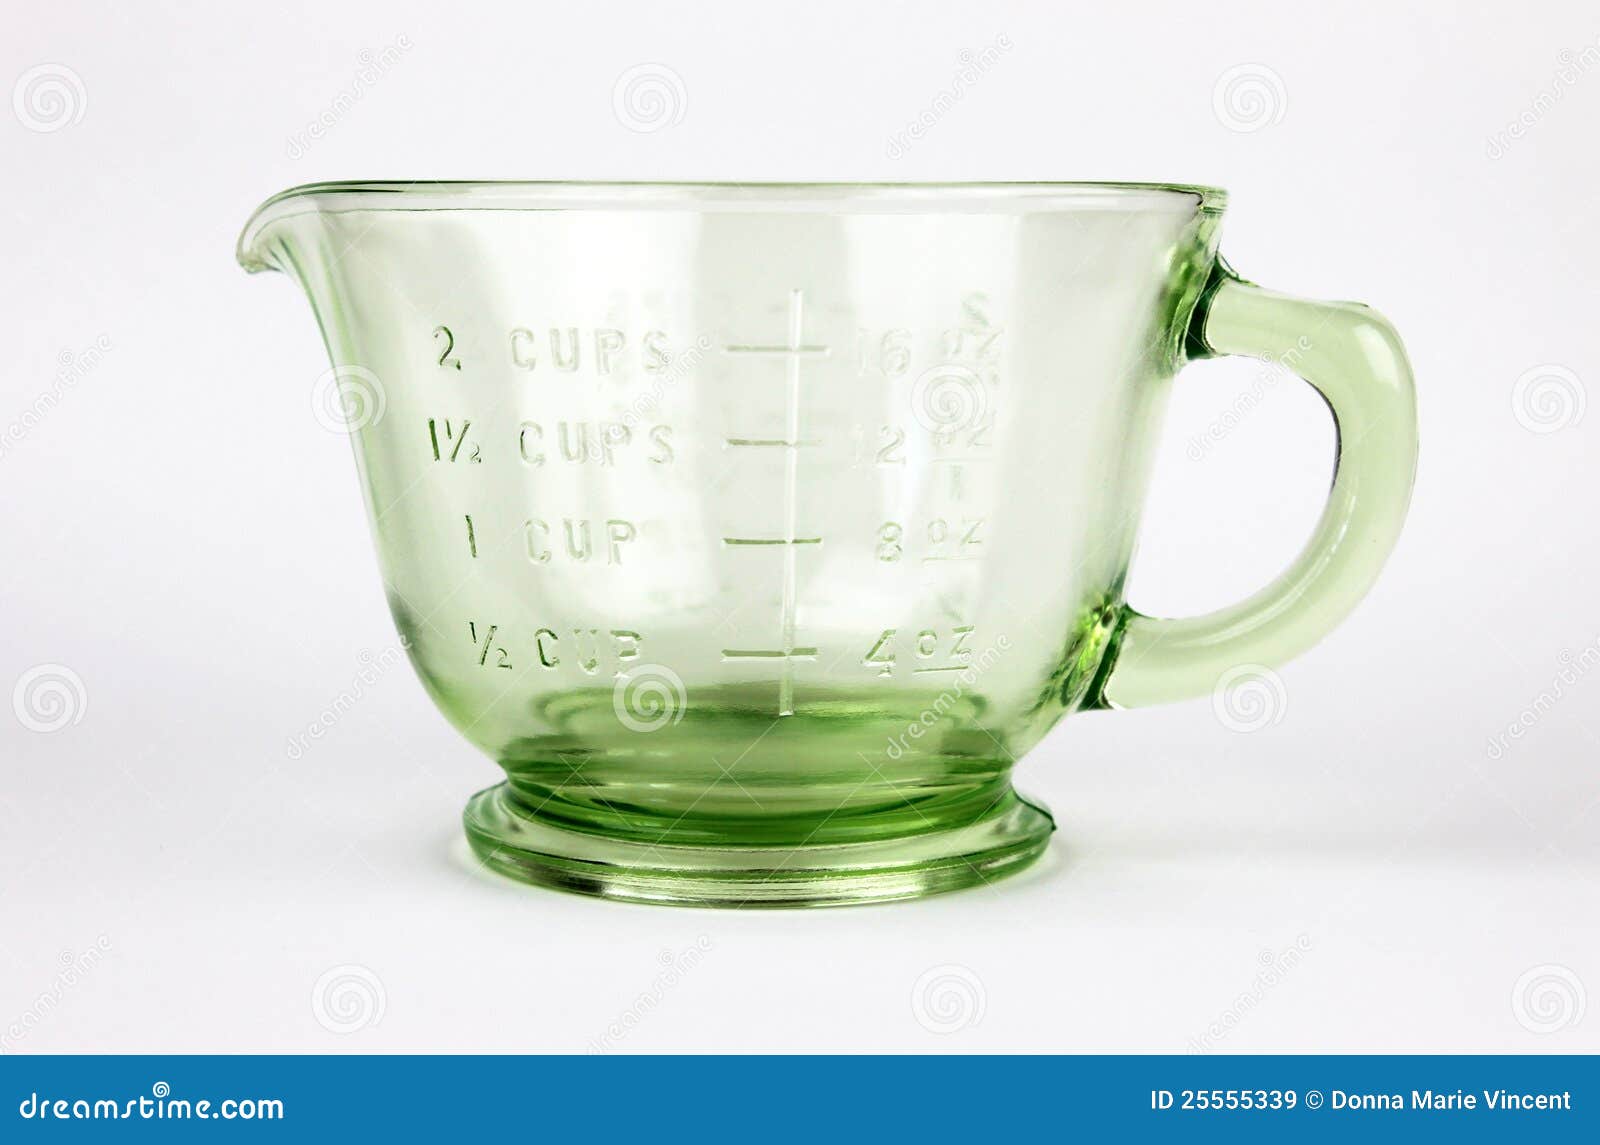 Green Depression Glass Measuring Cup Stock Image - Image of